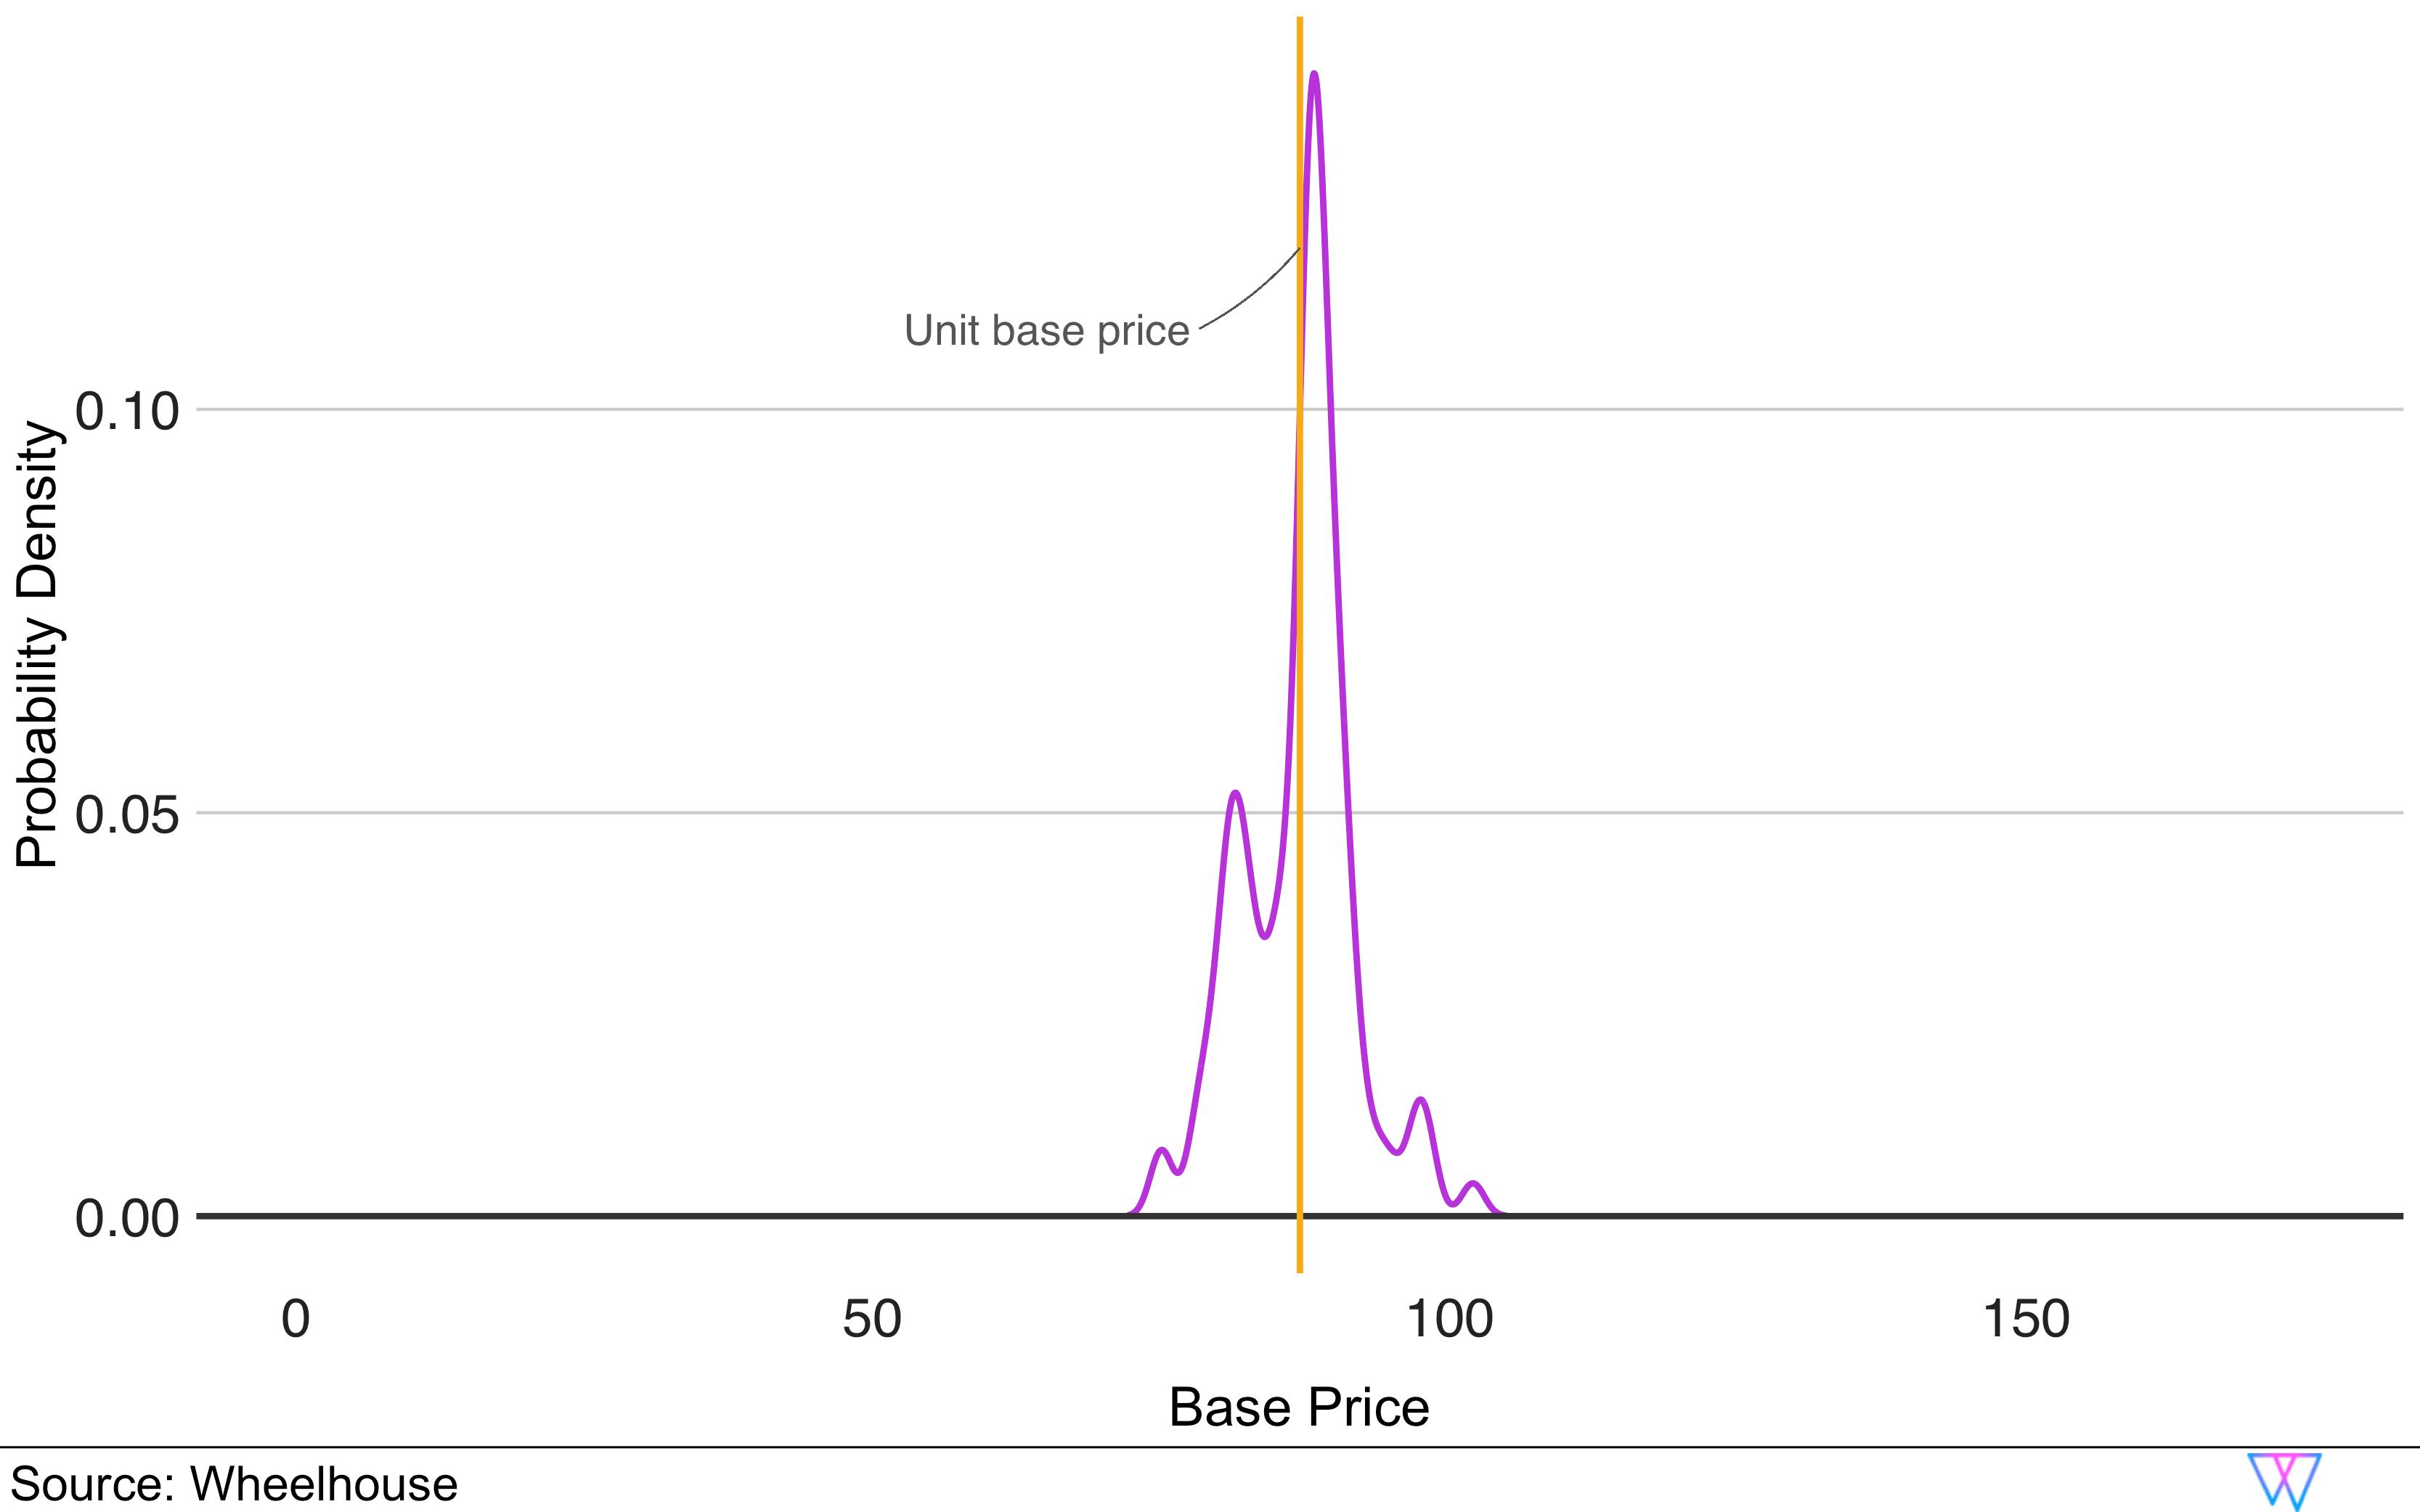 Impact of competitive set on base price